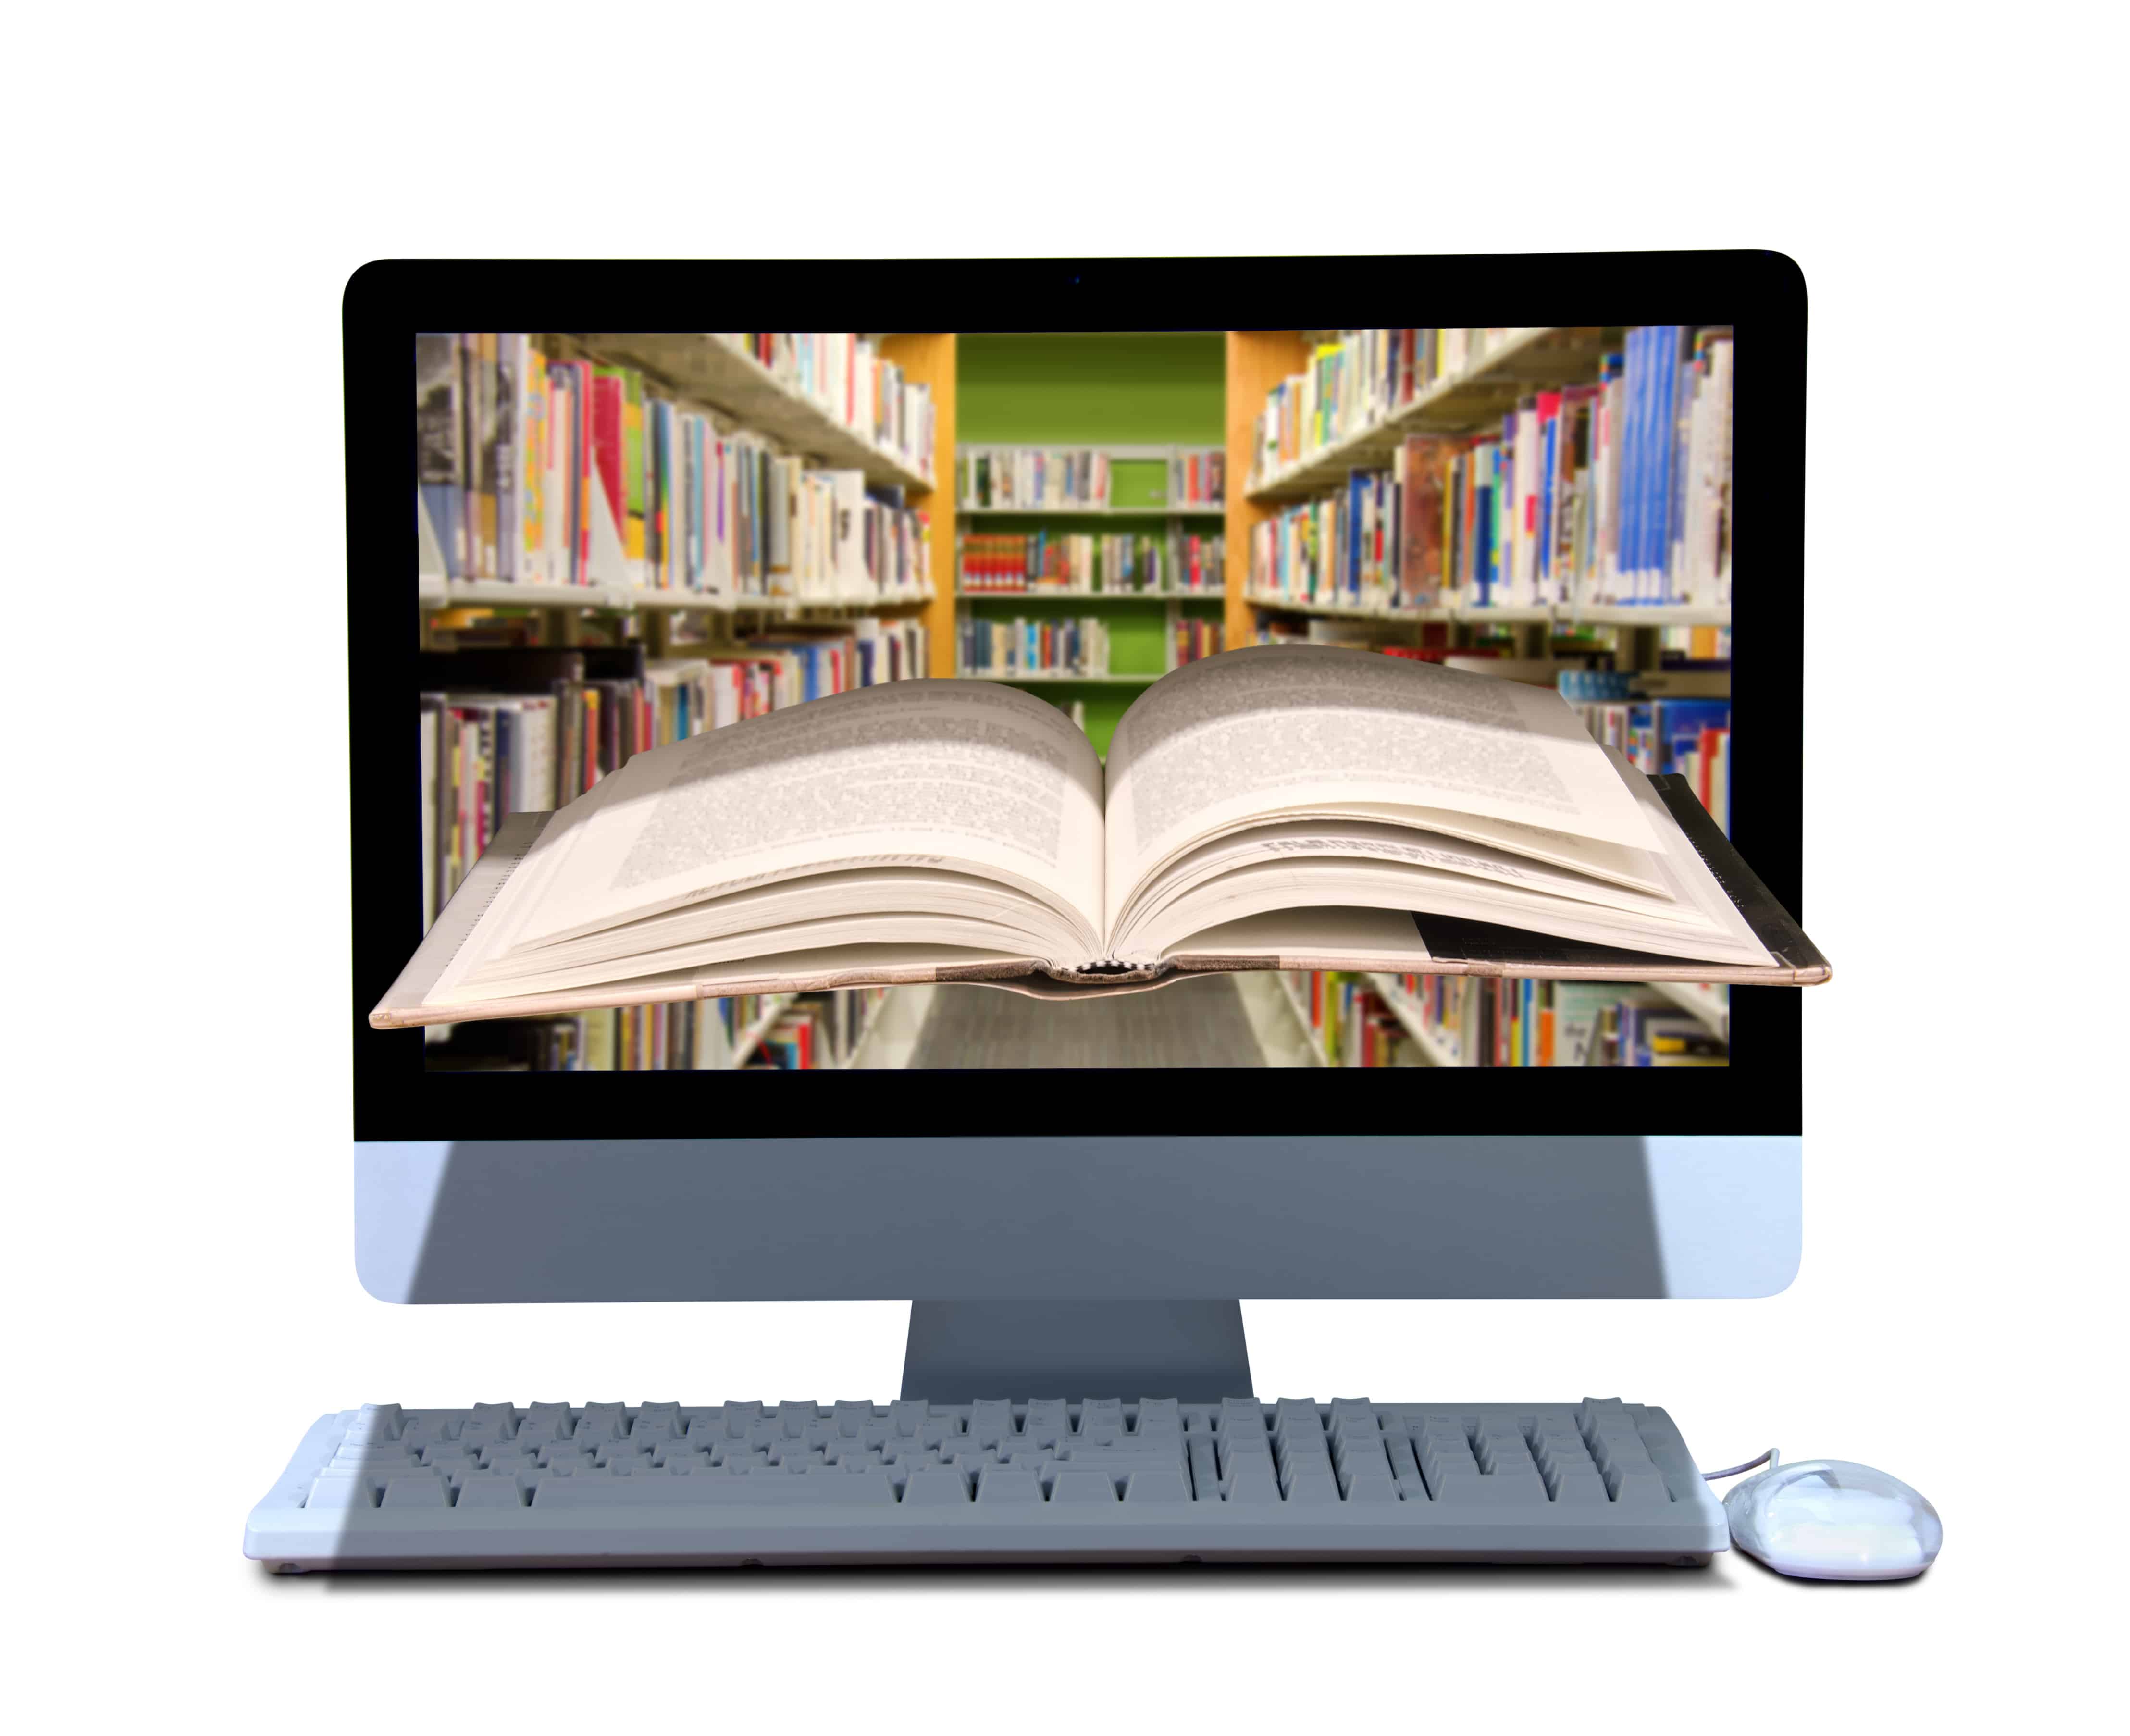 A book coming out of a computer with library on the screen of the computer representing online library, school, manual, instruction, e-book, research, search, dictionary, thesaurus and encyclopedia.